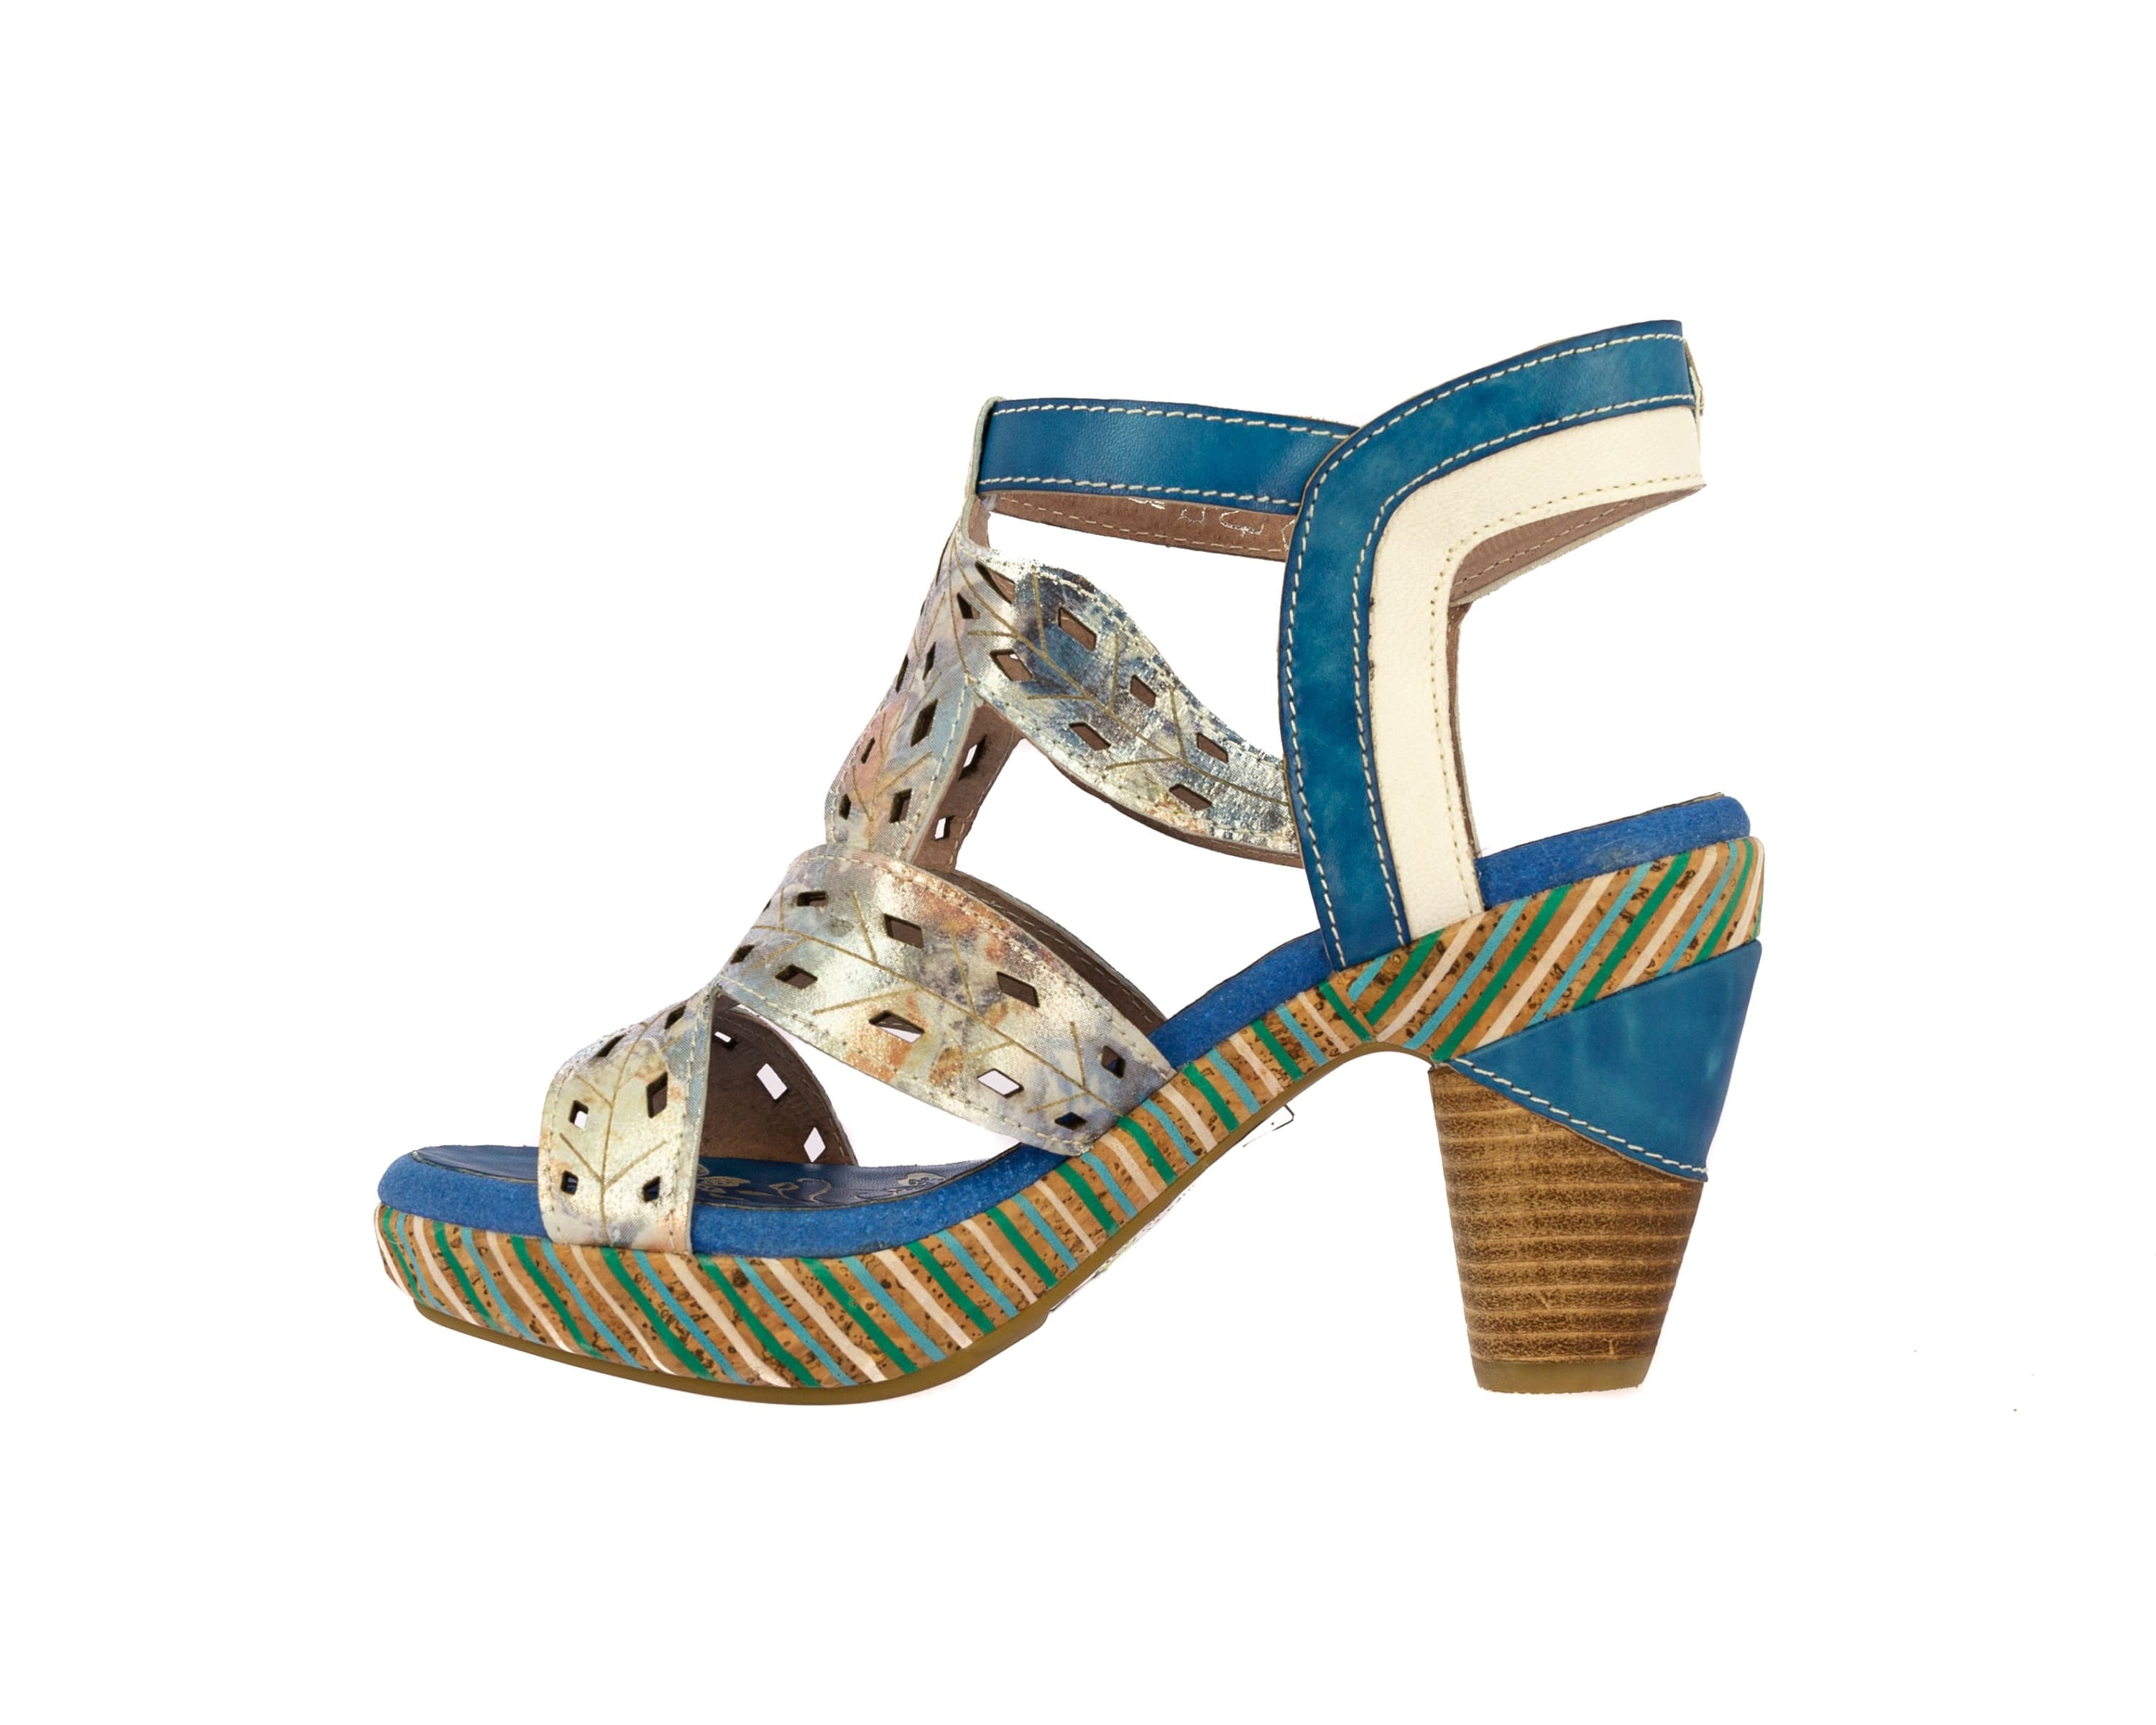 Chaussures FICNALO 12 - Sandale